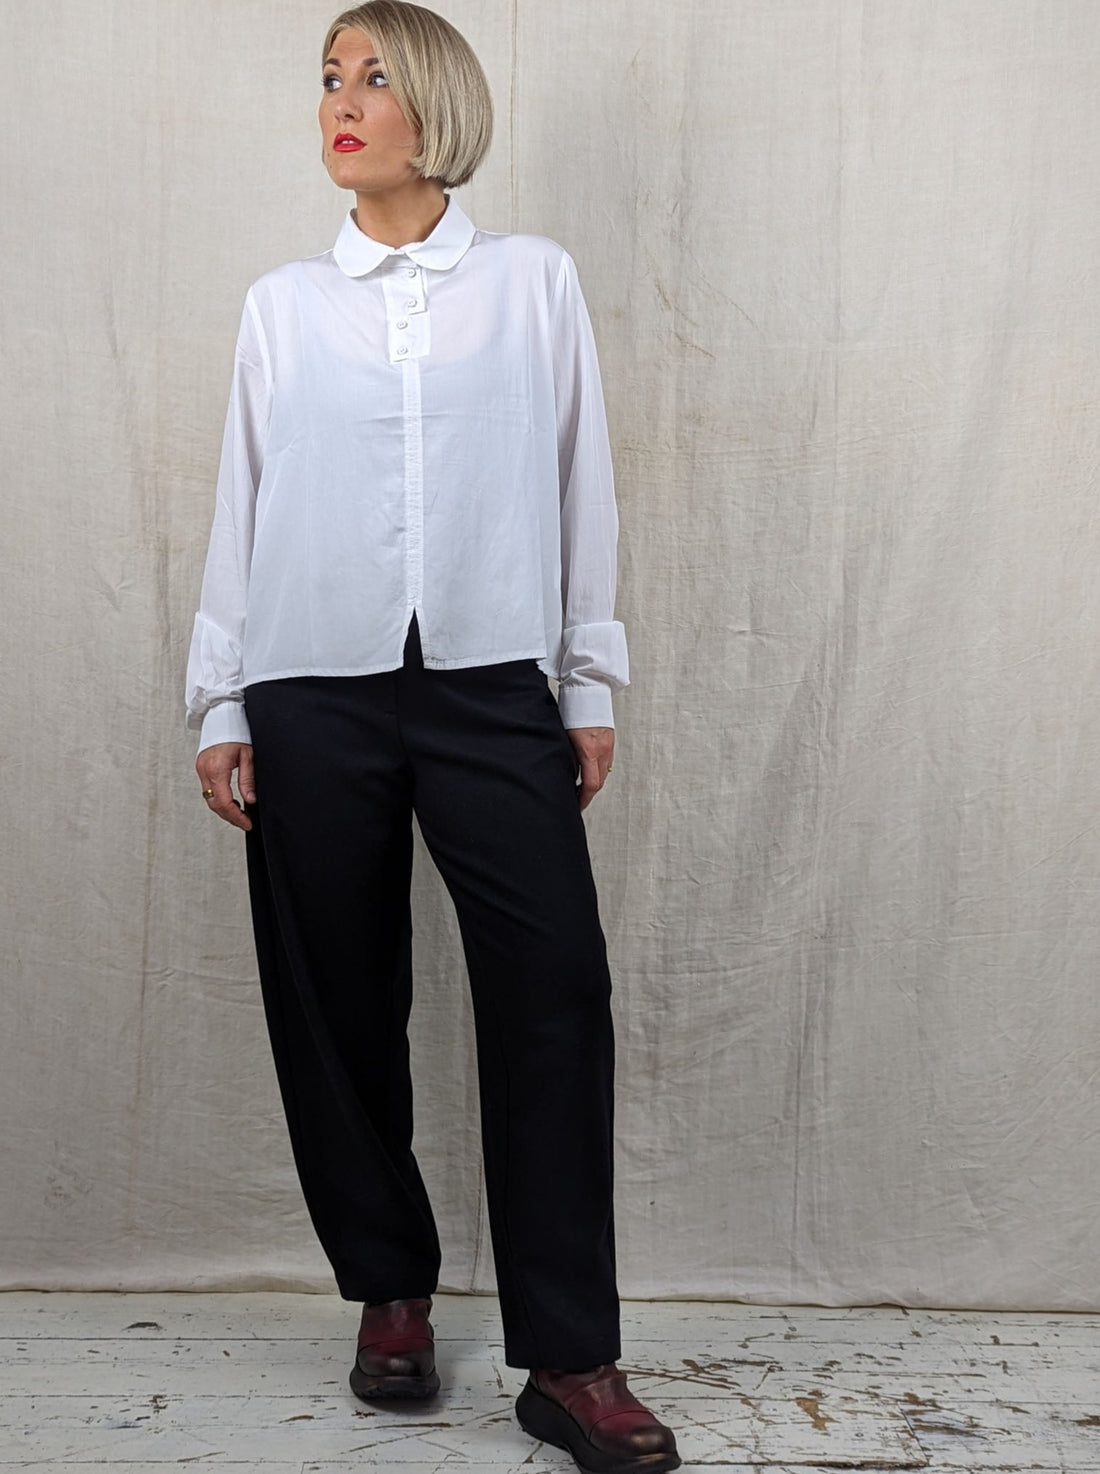 Neirami Country Trousers in Black